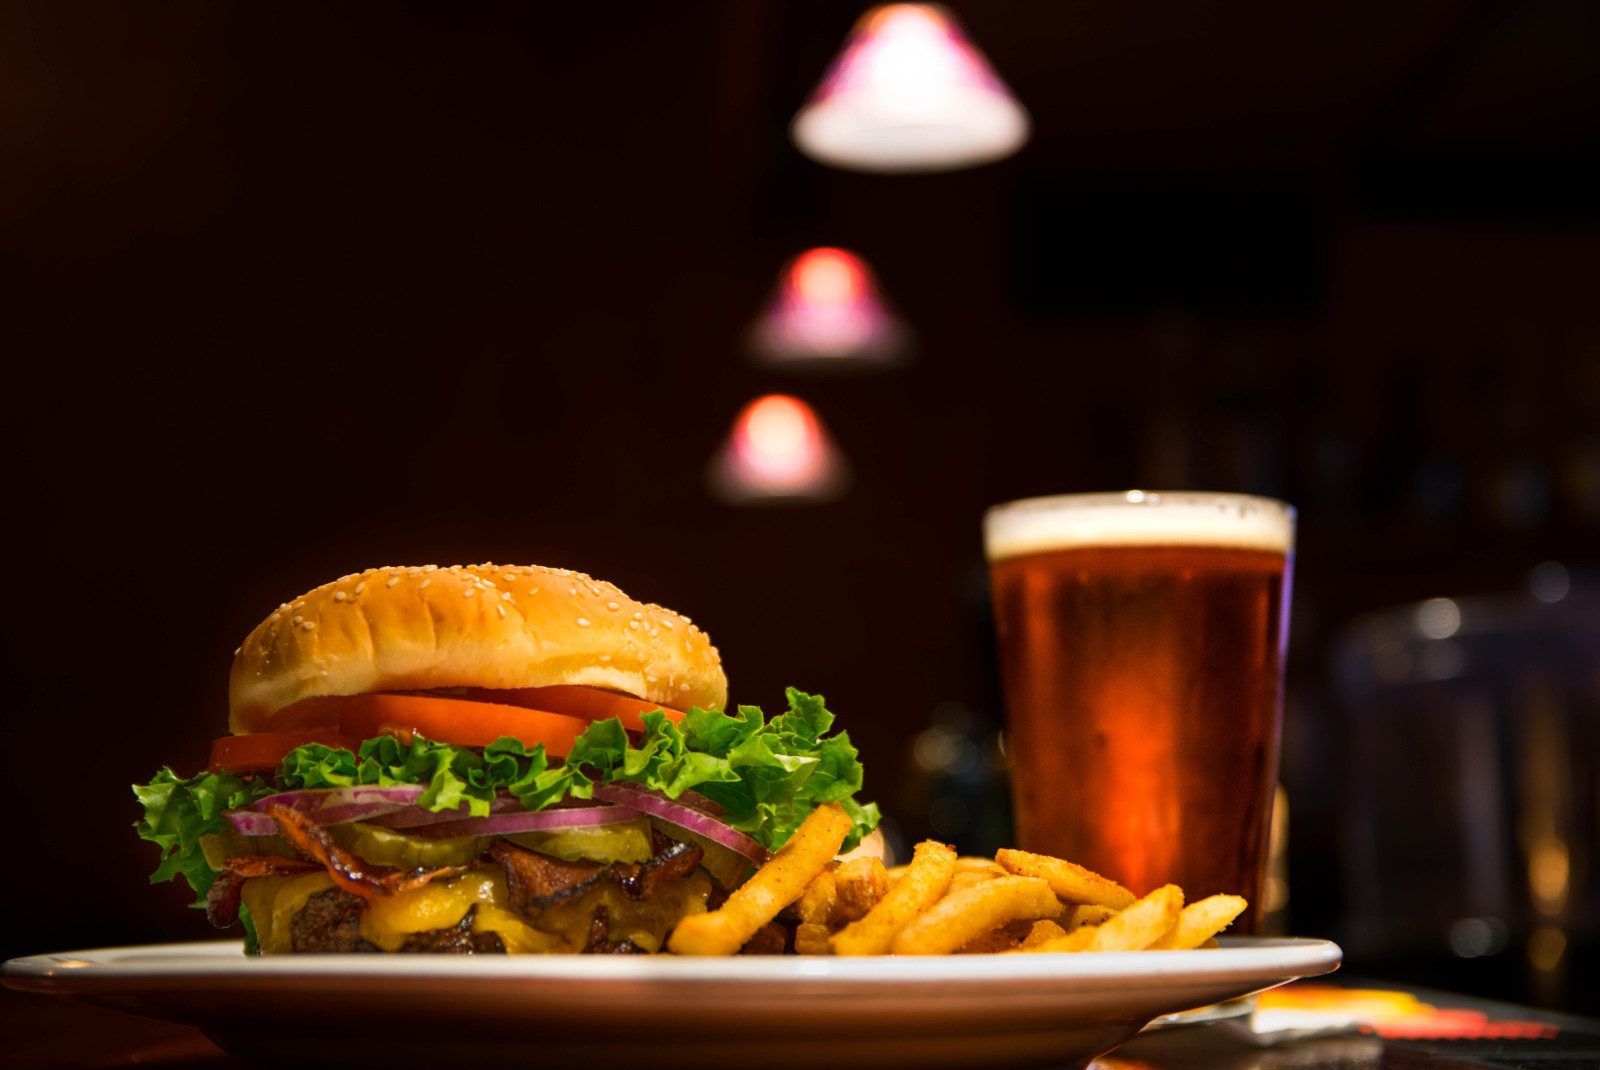 Burger with fries on a white plate with a glass of beer